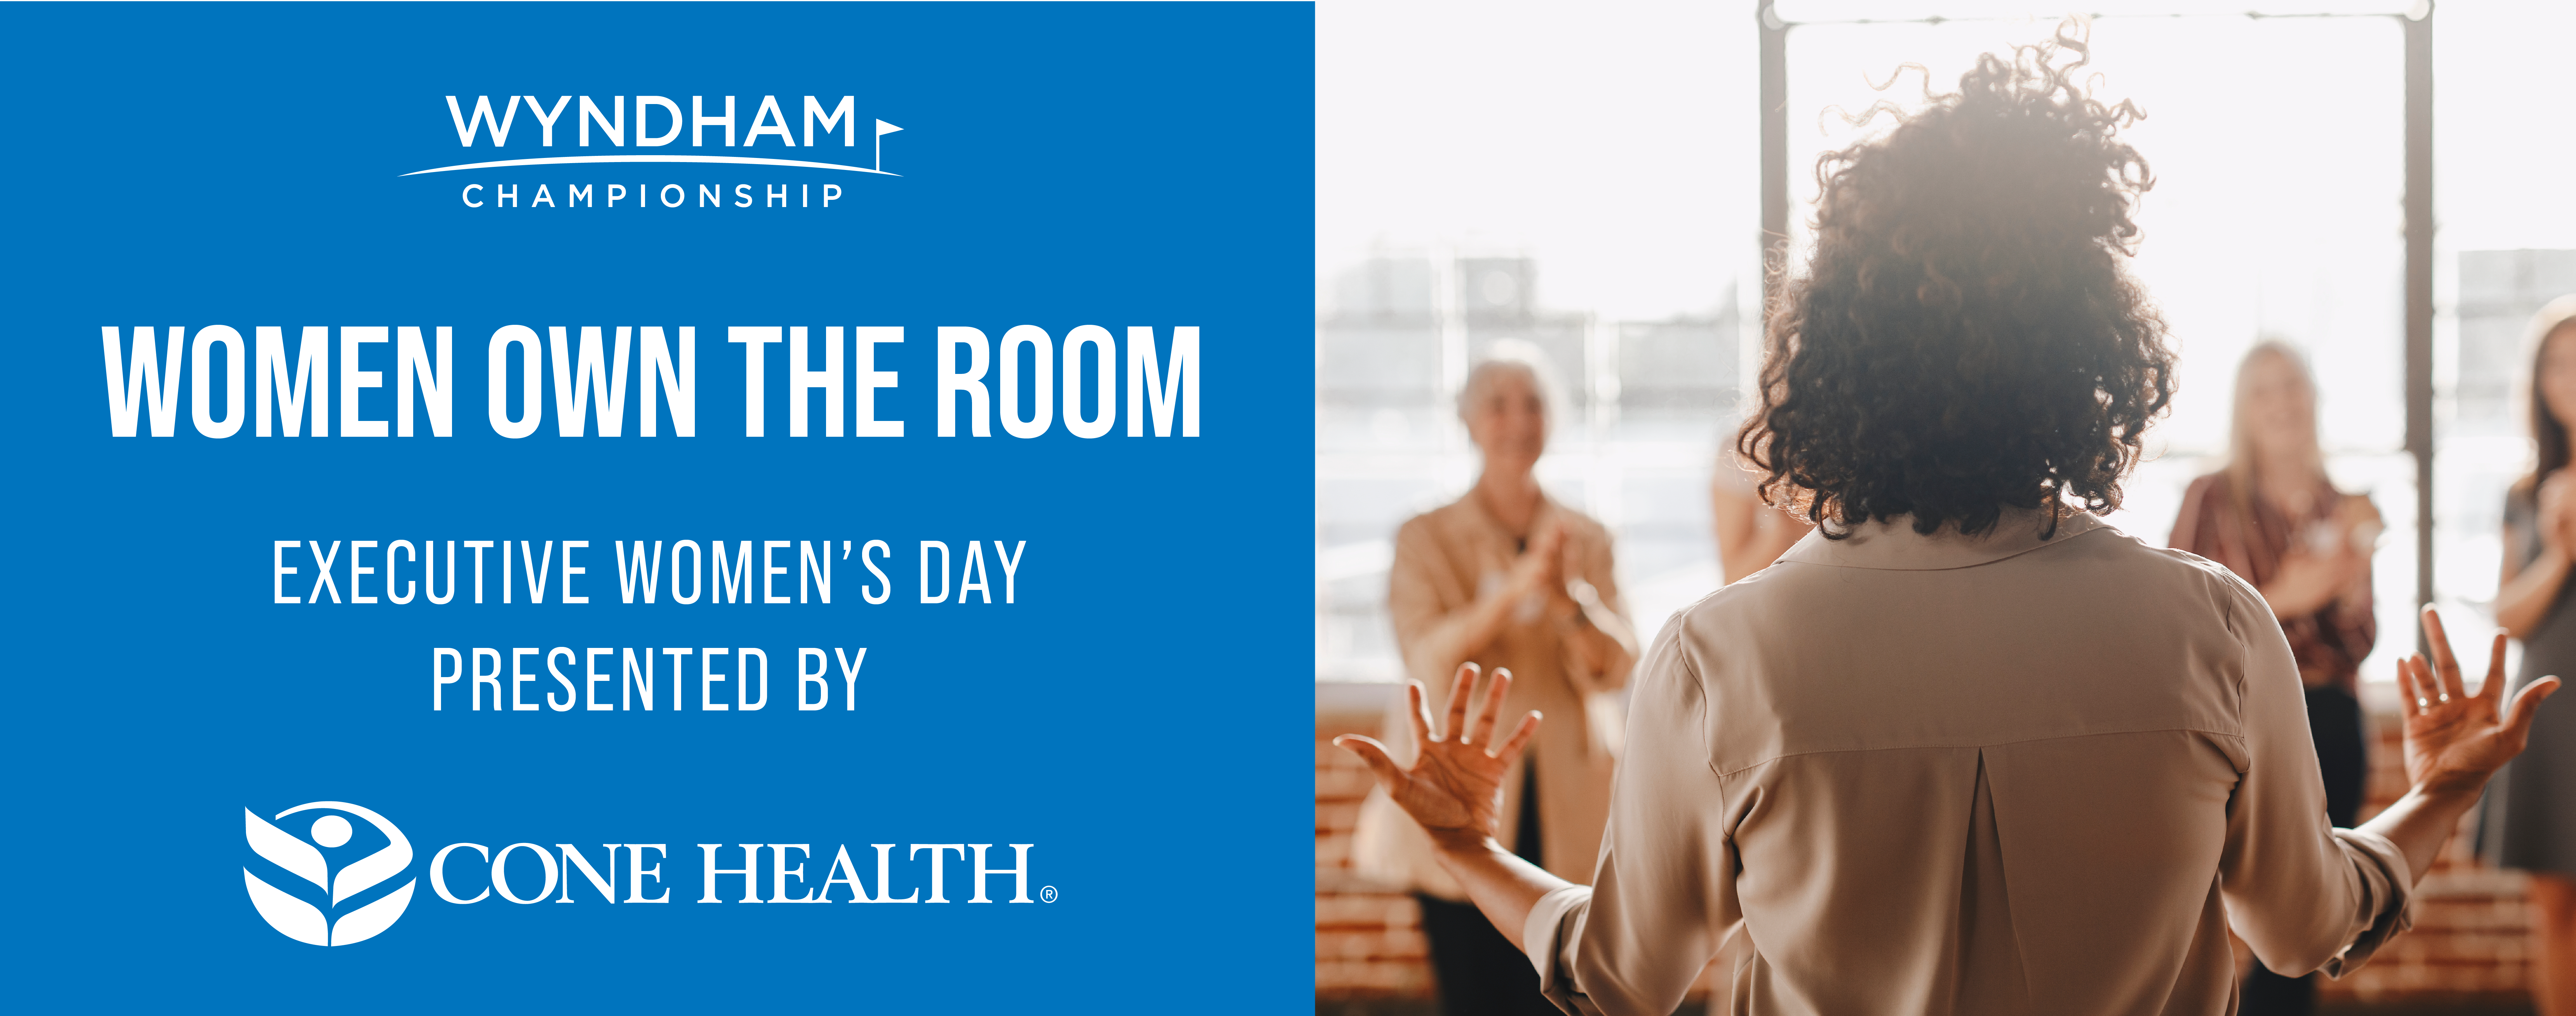 WOMEN OWN THE ROOM WYNDHAM CHAMPIONSHIP EXECUTIVE WOMENS DAY; FREE LIVE STREAM